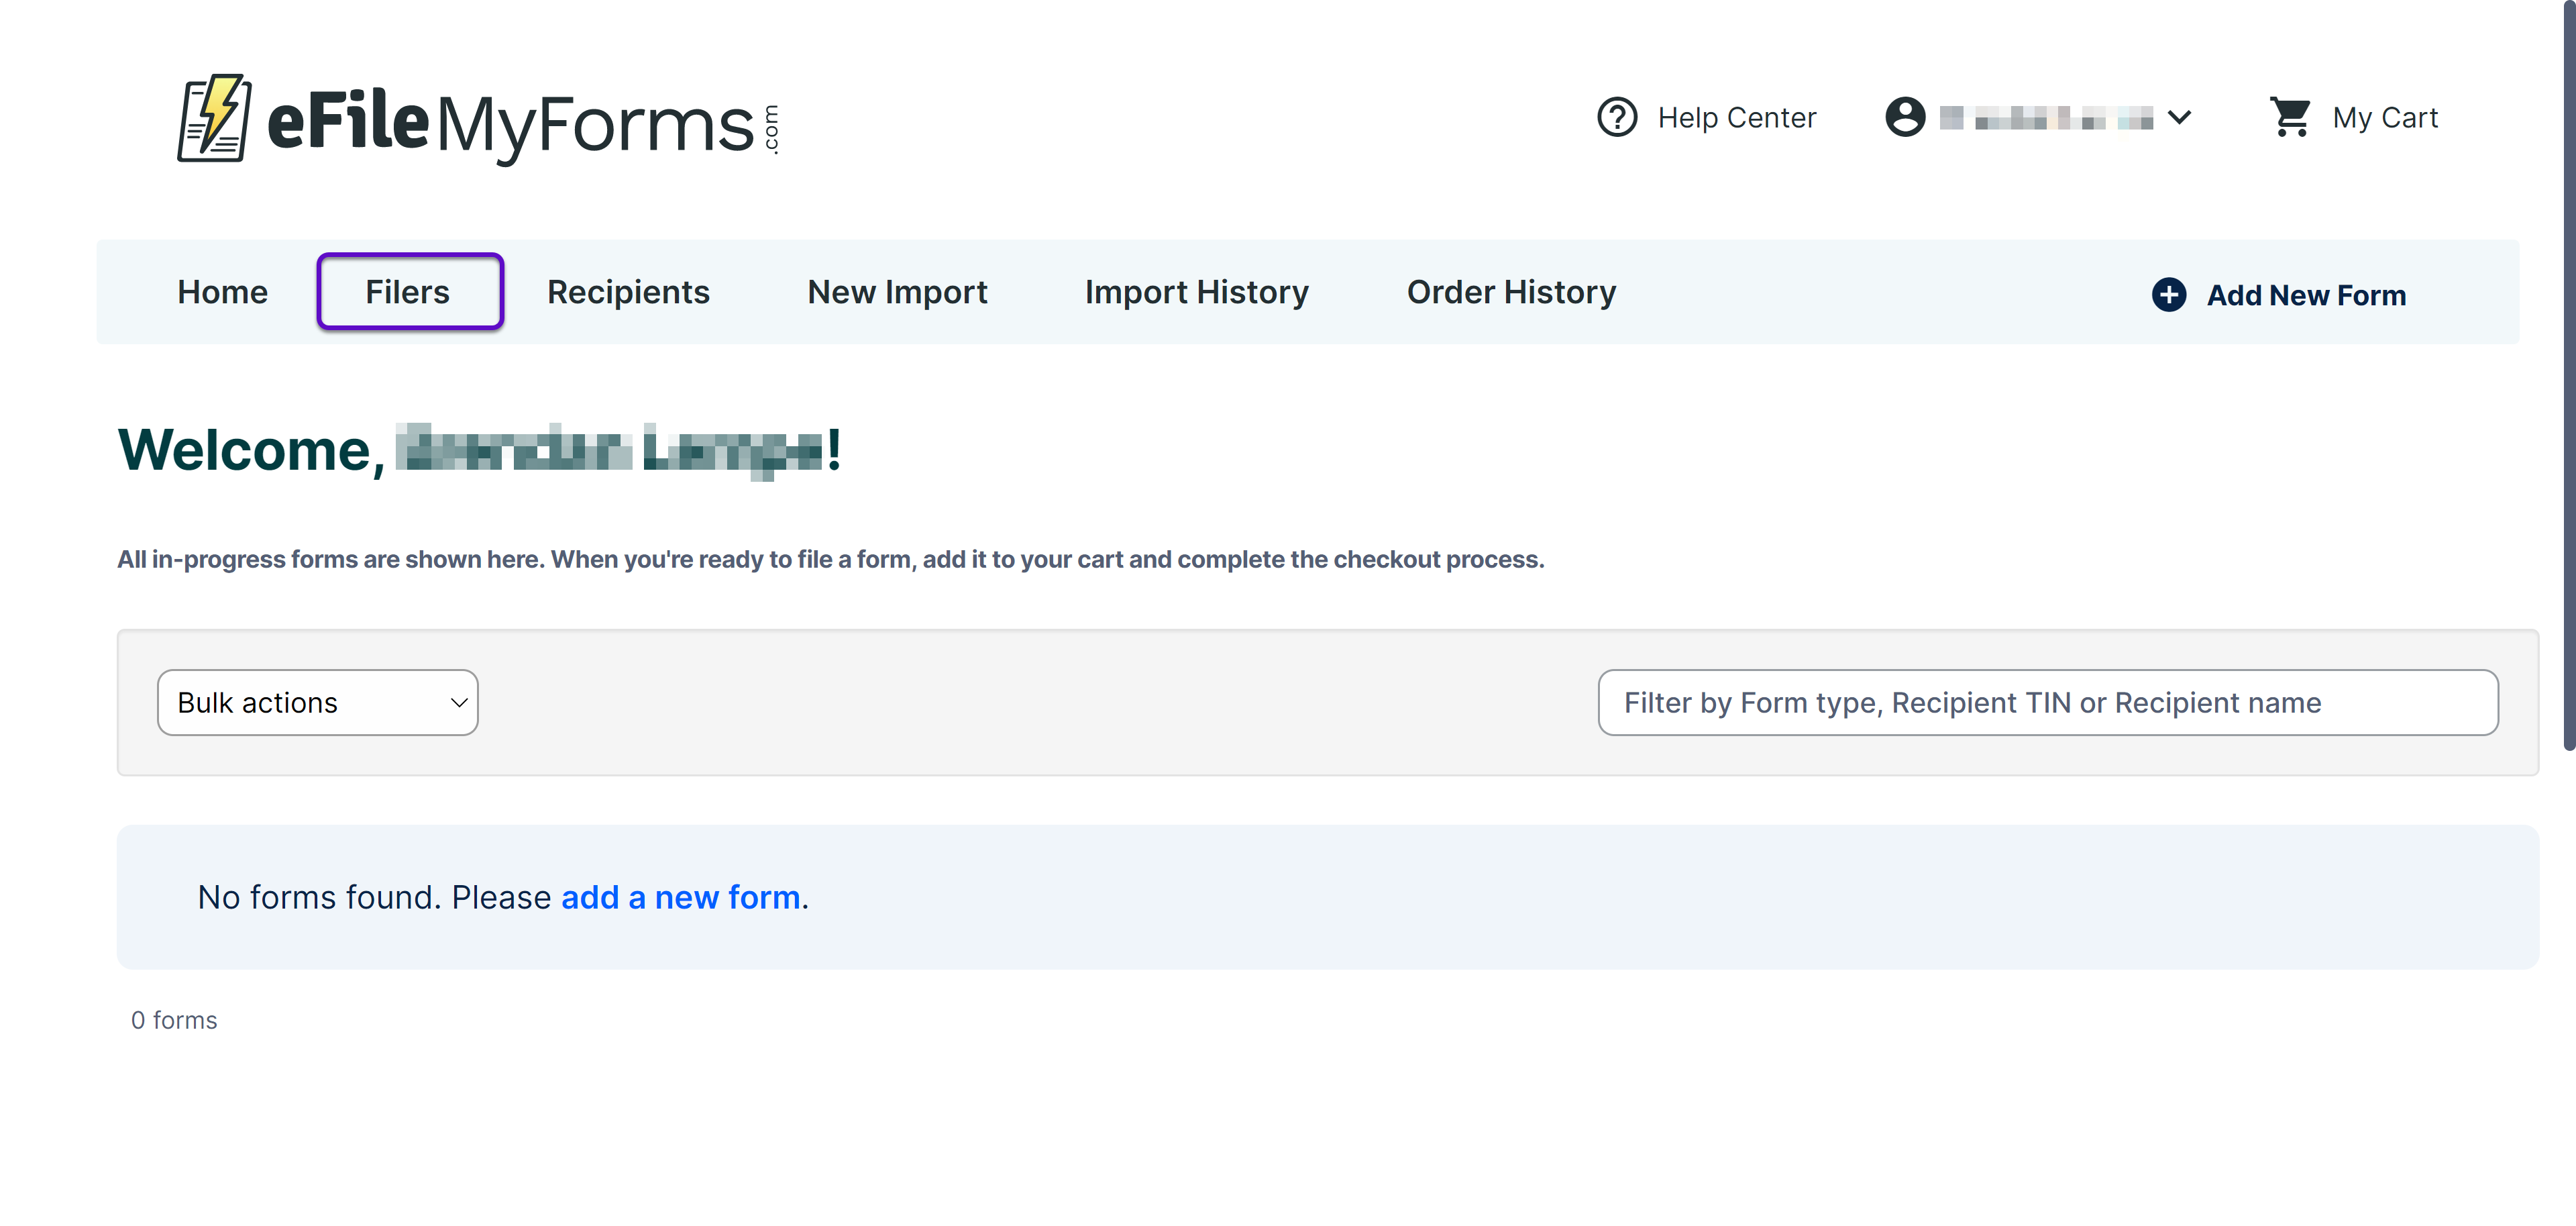 Image of the eFileMyForms home page with a callout on the Filers button.